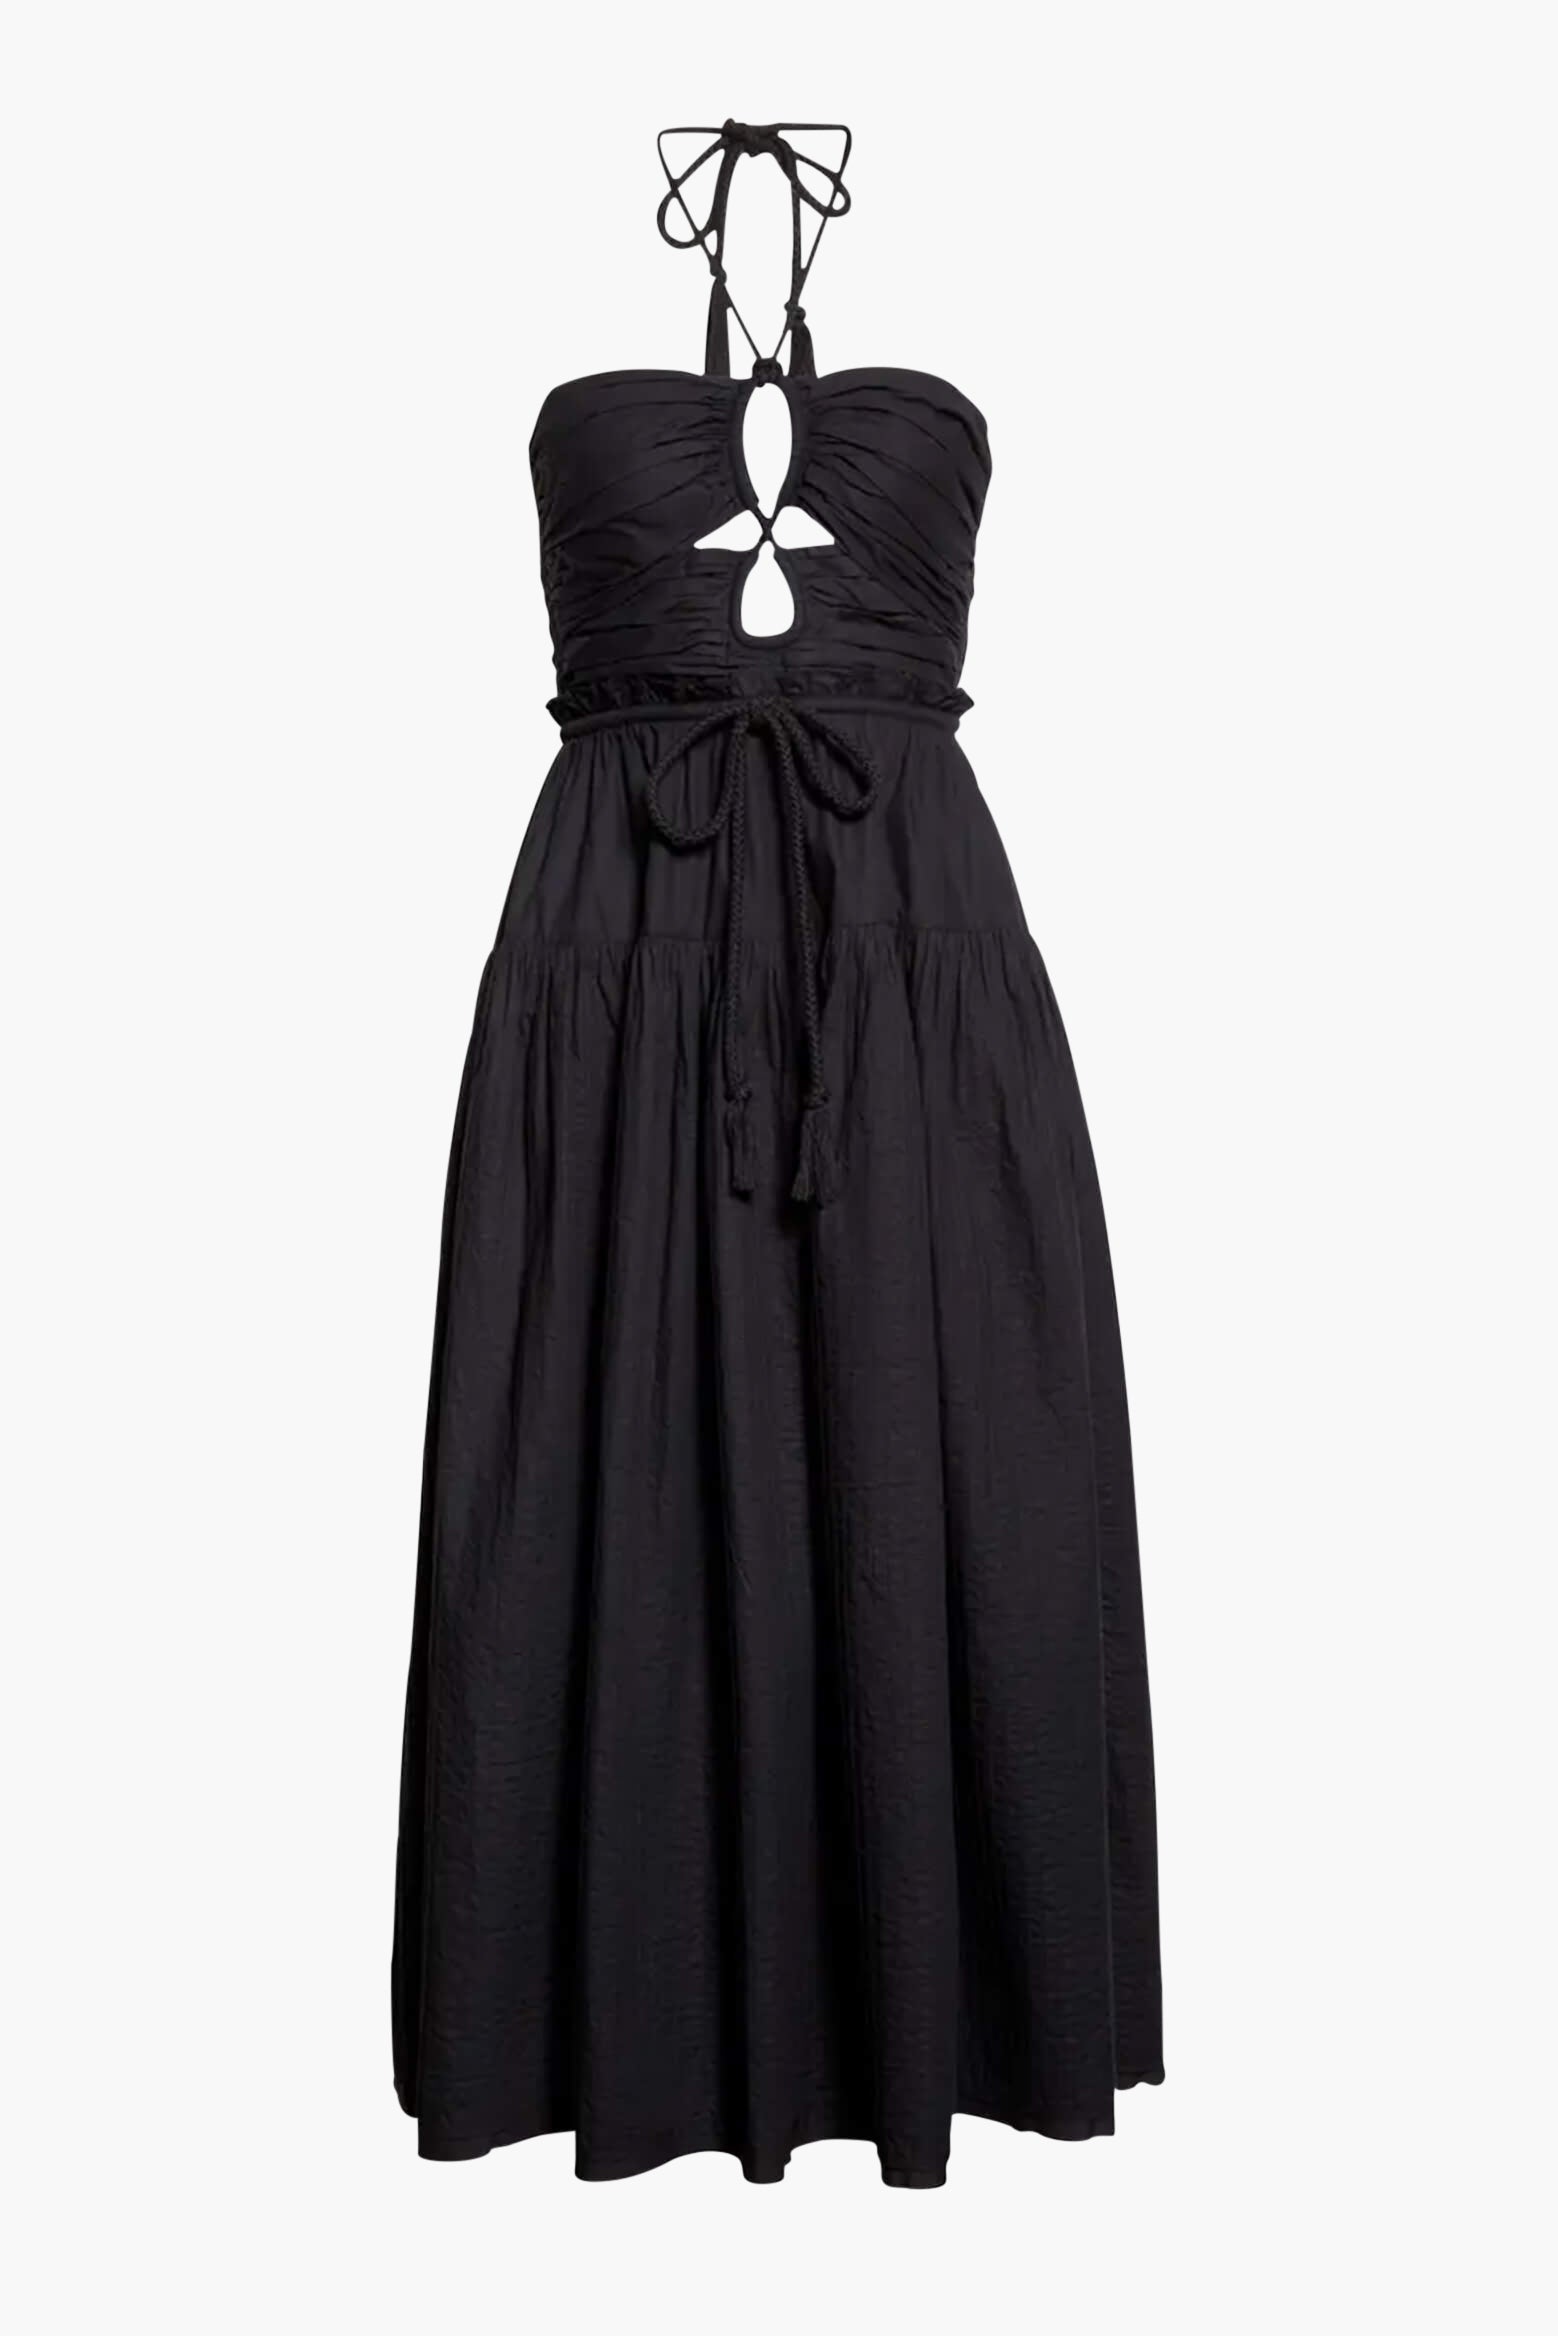 Ulla Johnson Emmaline Dress in Noir available at The New Trend